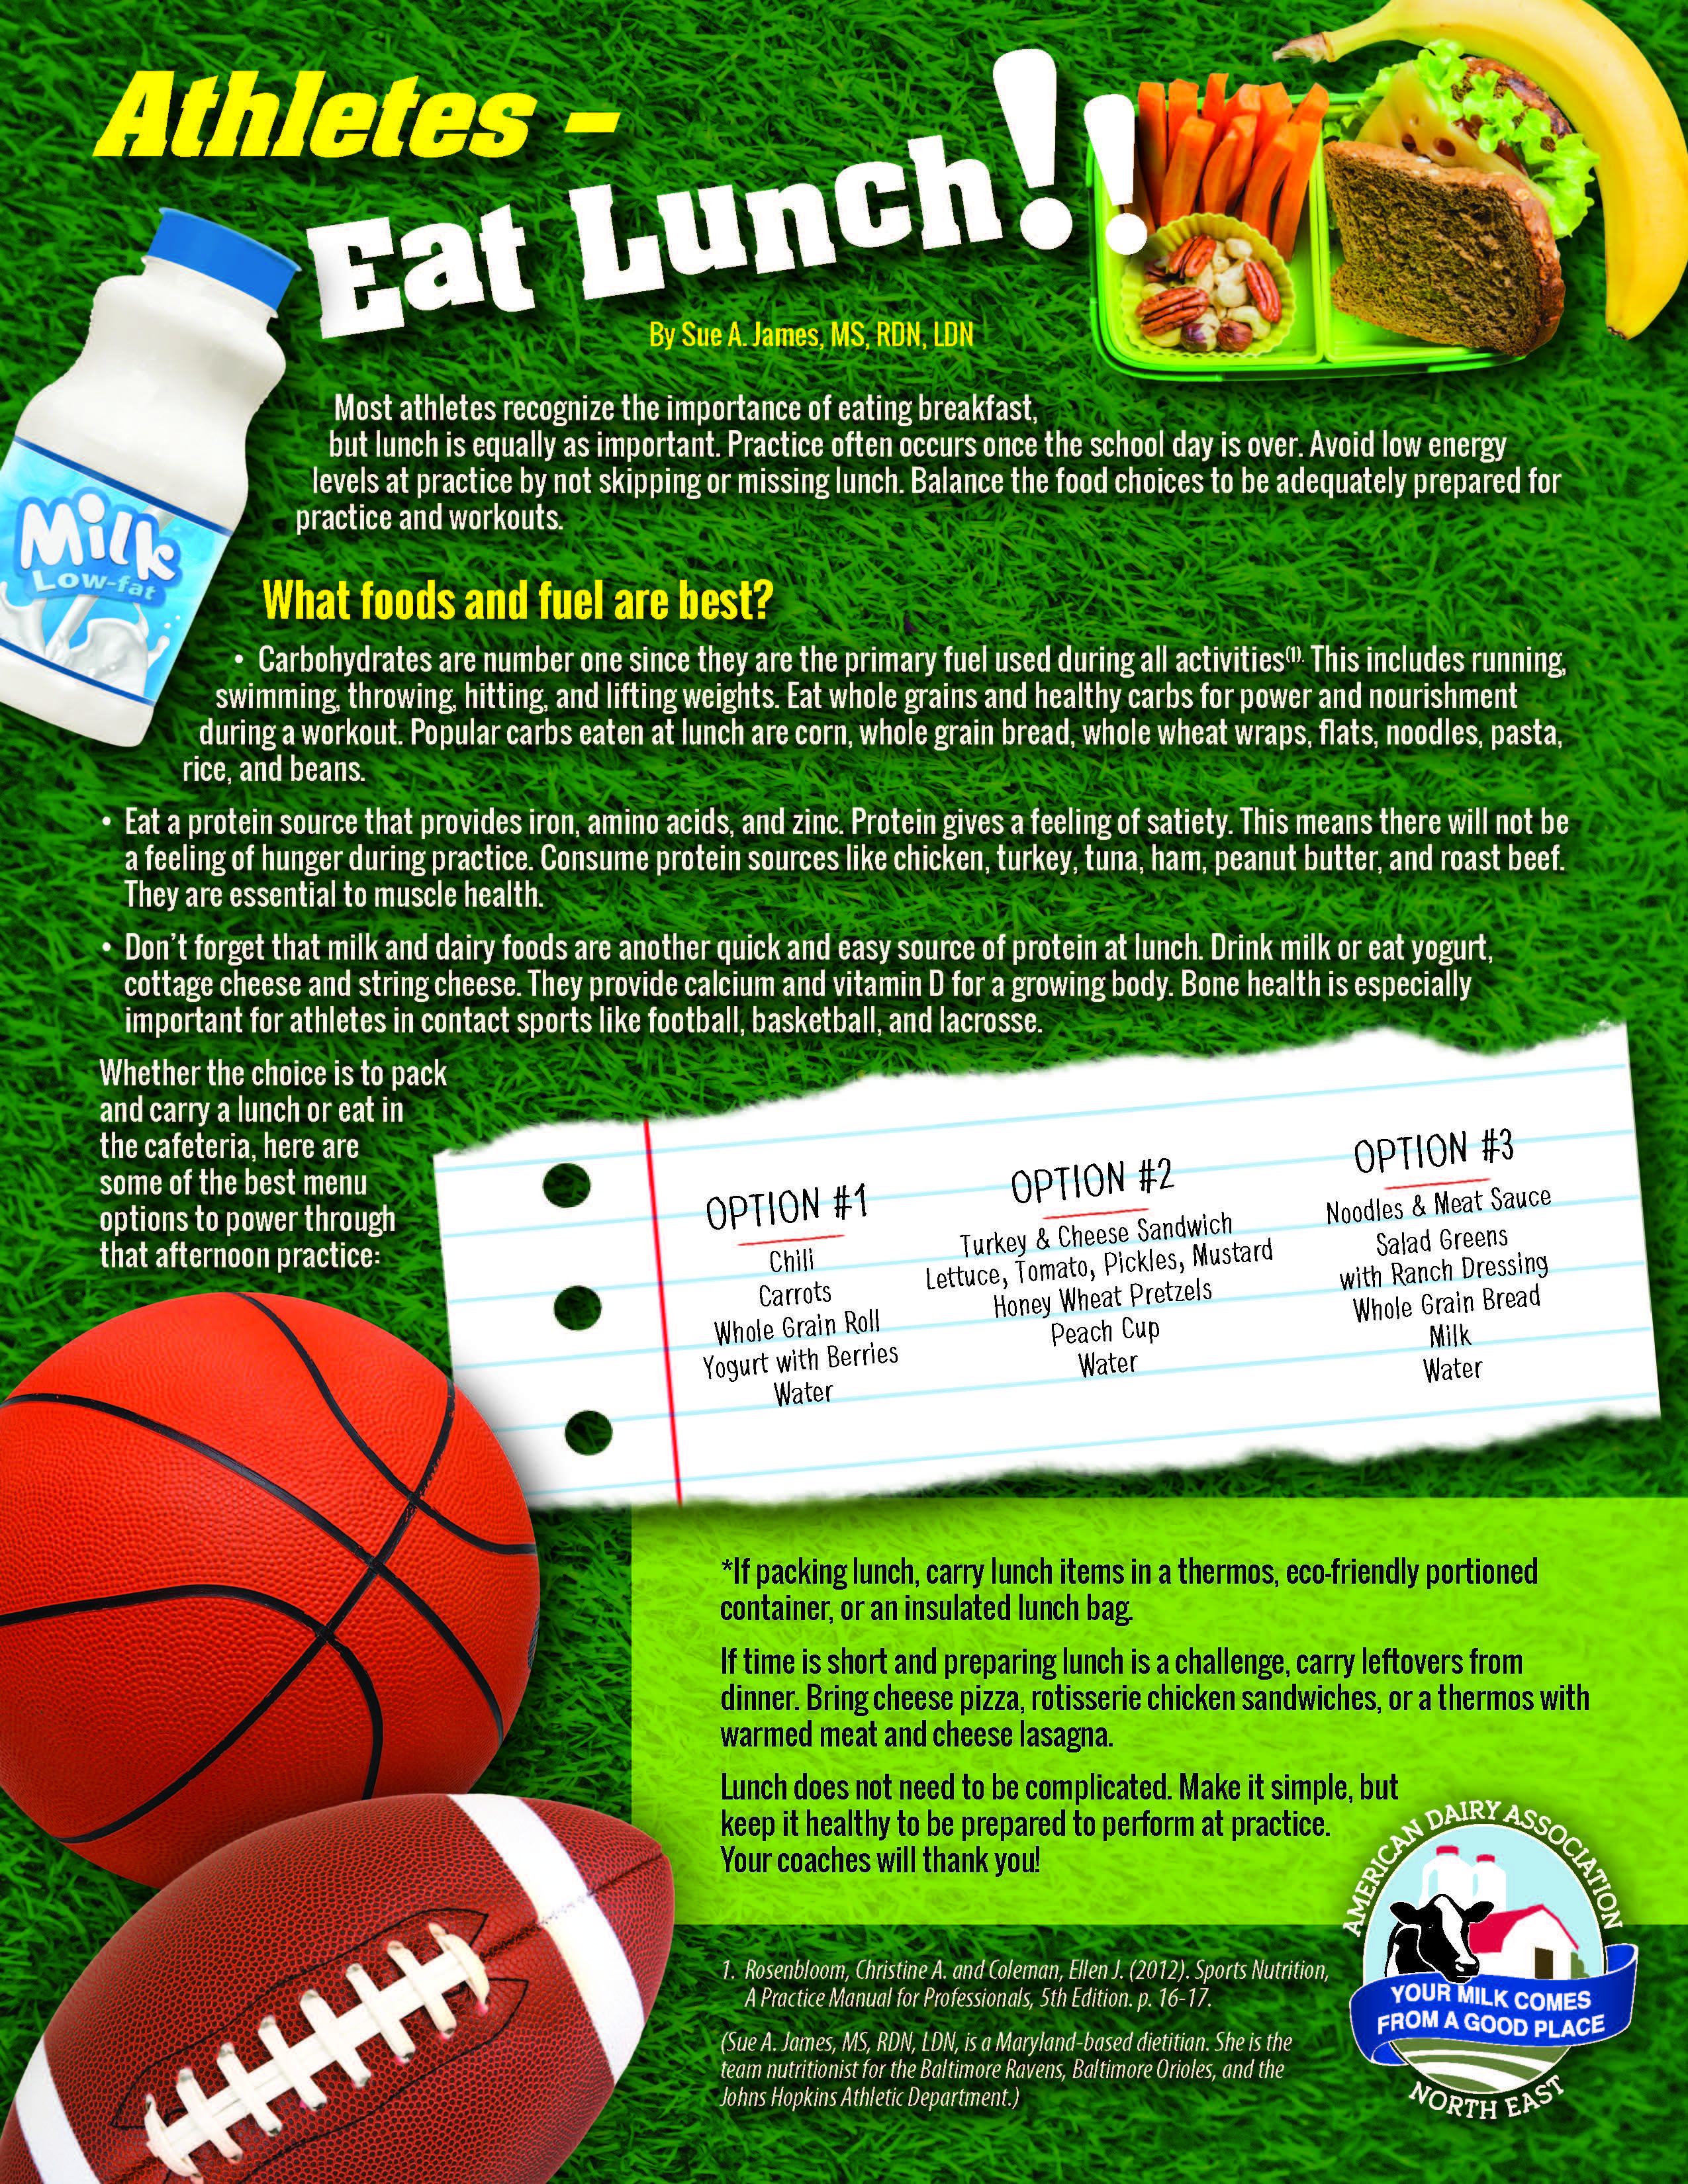 Hey, Athletes - Make Sure to Eat Lunch, Too!